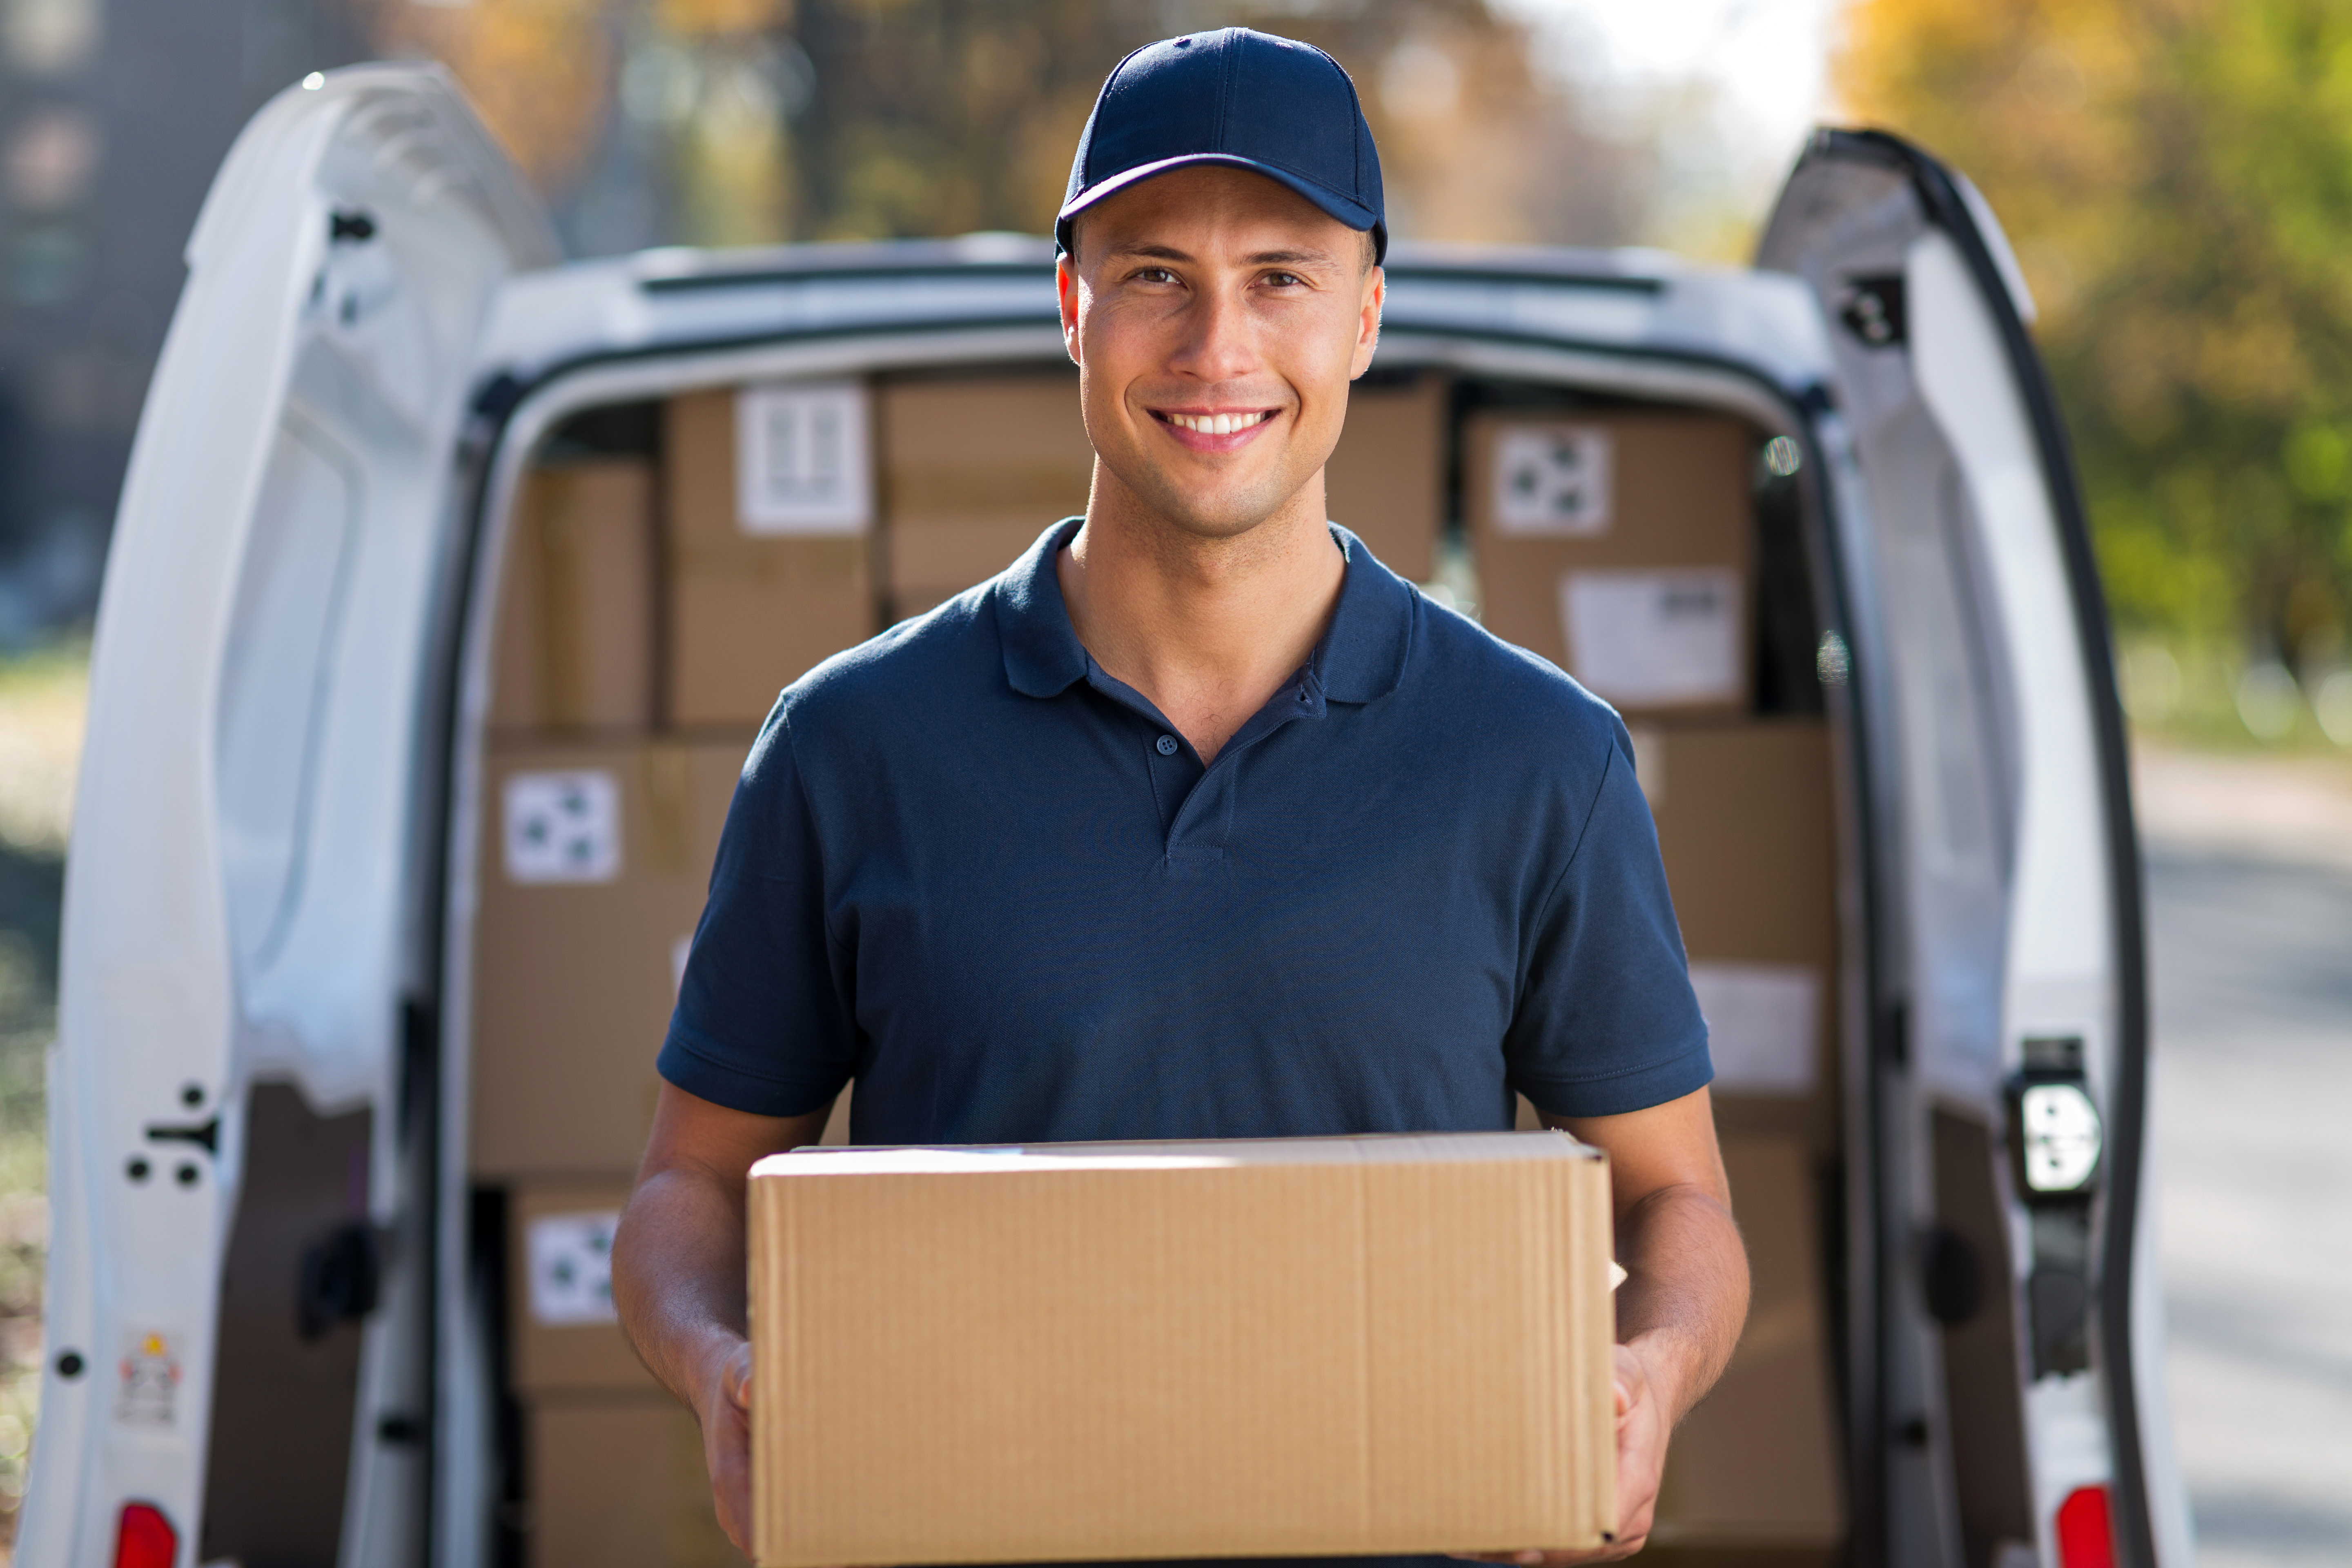 We specialize in providing moving and storage insurance for companies across the United States, which gives us a unique understanding of the risk you face.